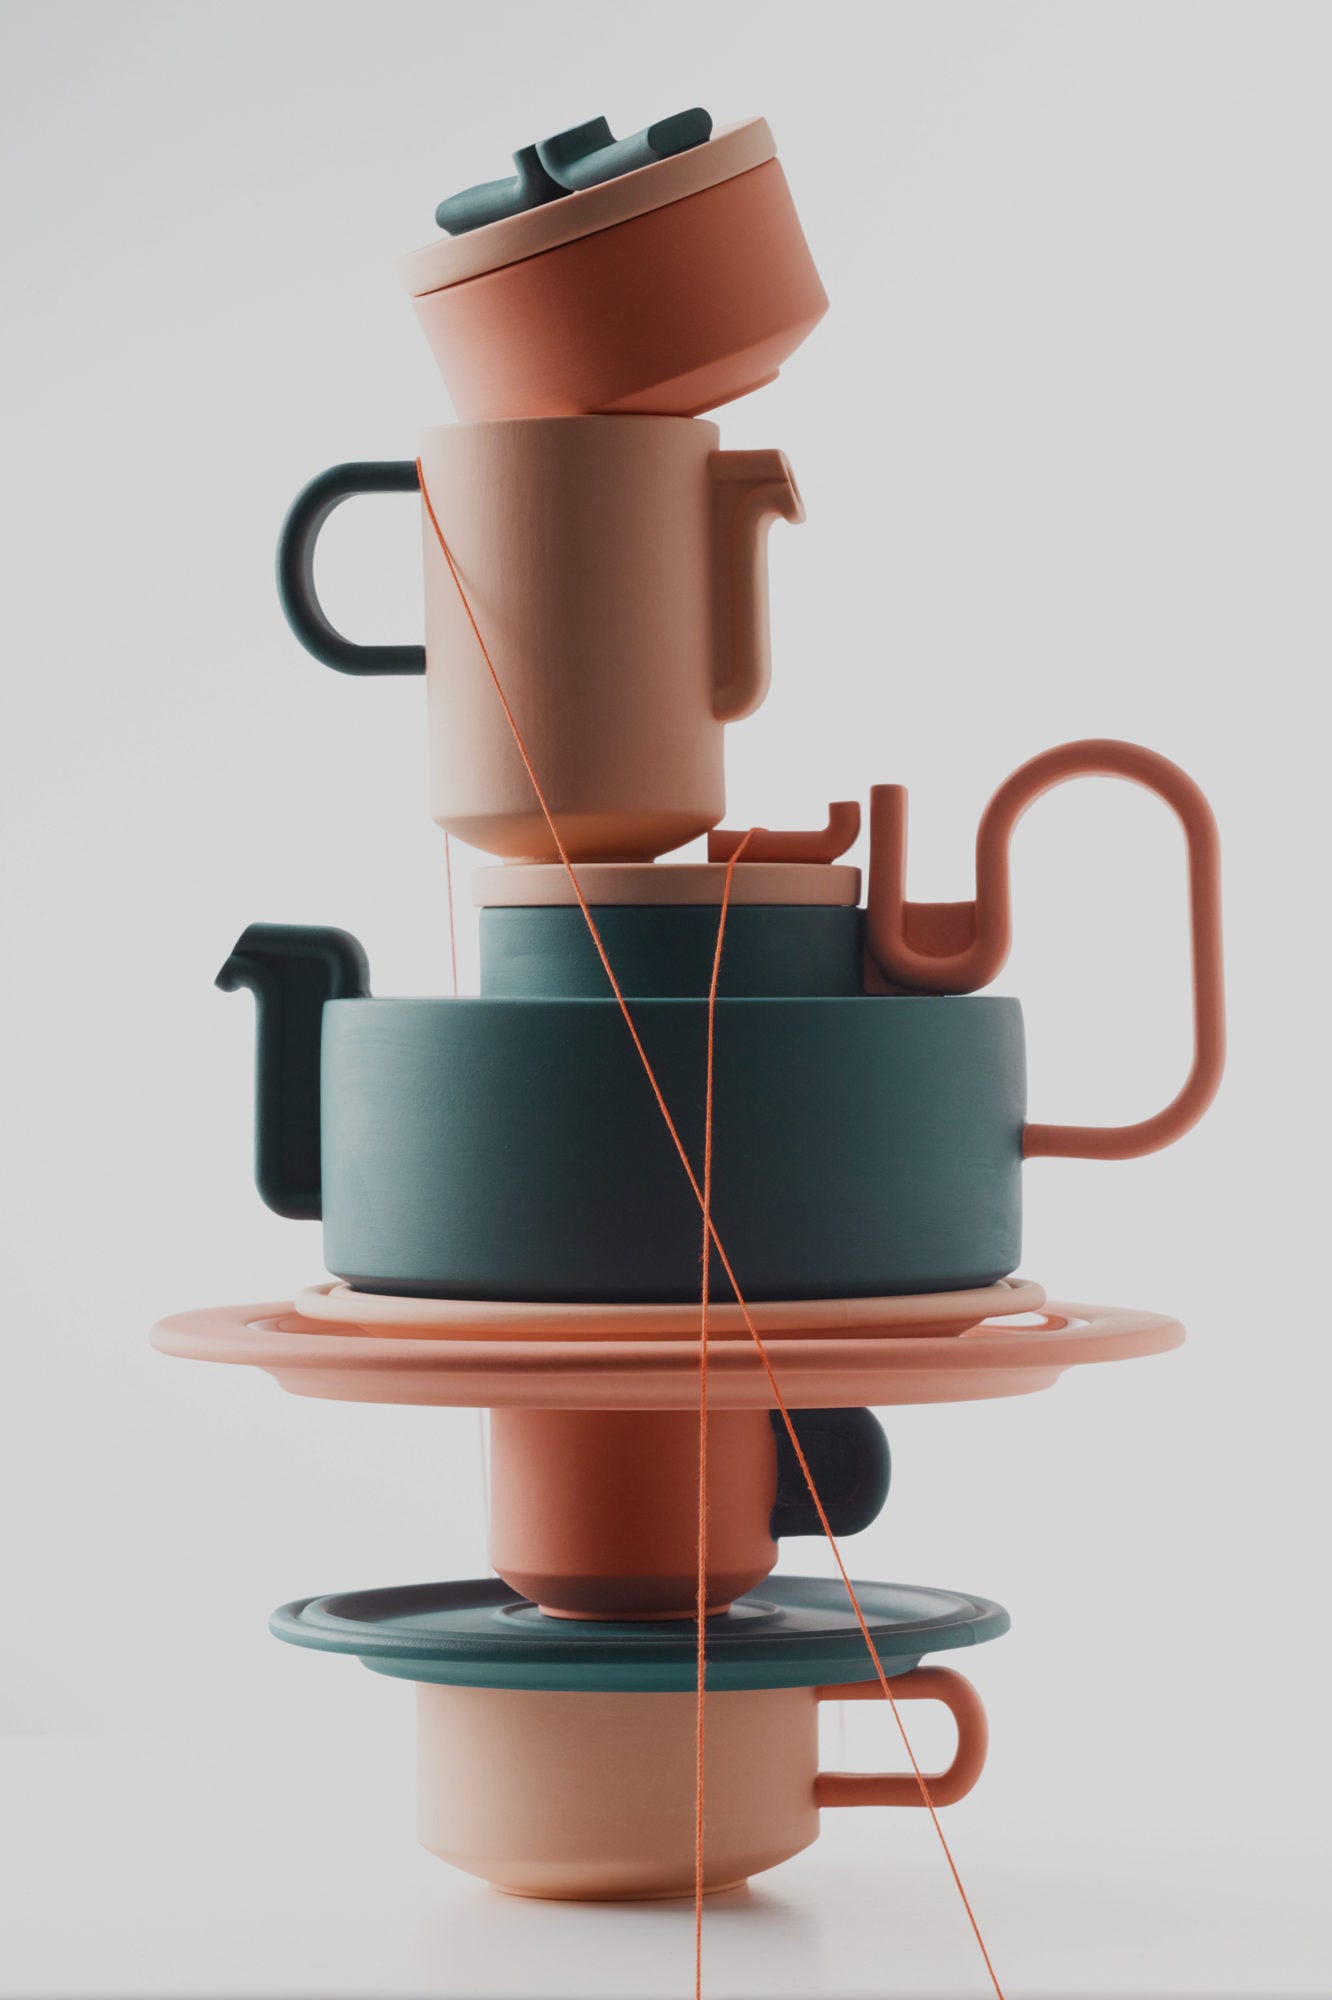 British designer Bethan Laura Wood nodded to details in Rosenthal's classic TAC tea set by Bauhaus architect Walter Gropius, where the lid top and handle come together to create a single flowing curve, in her playful Tongue collection for Rosenthal. Wood's design also references other elements throughout the brand's history, from the wiggles of Eduardo Paolozzi, to the hot pink flamingos that once took up residence in the center of the factory.